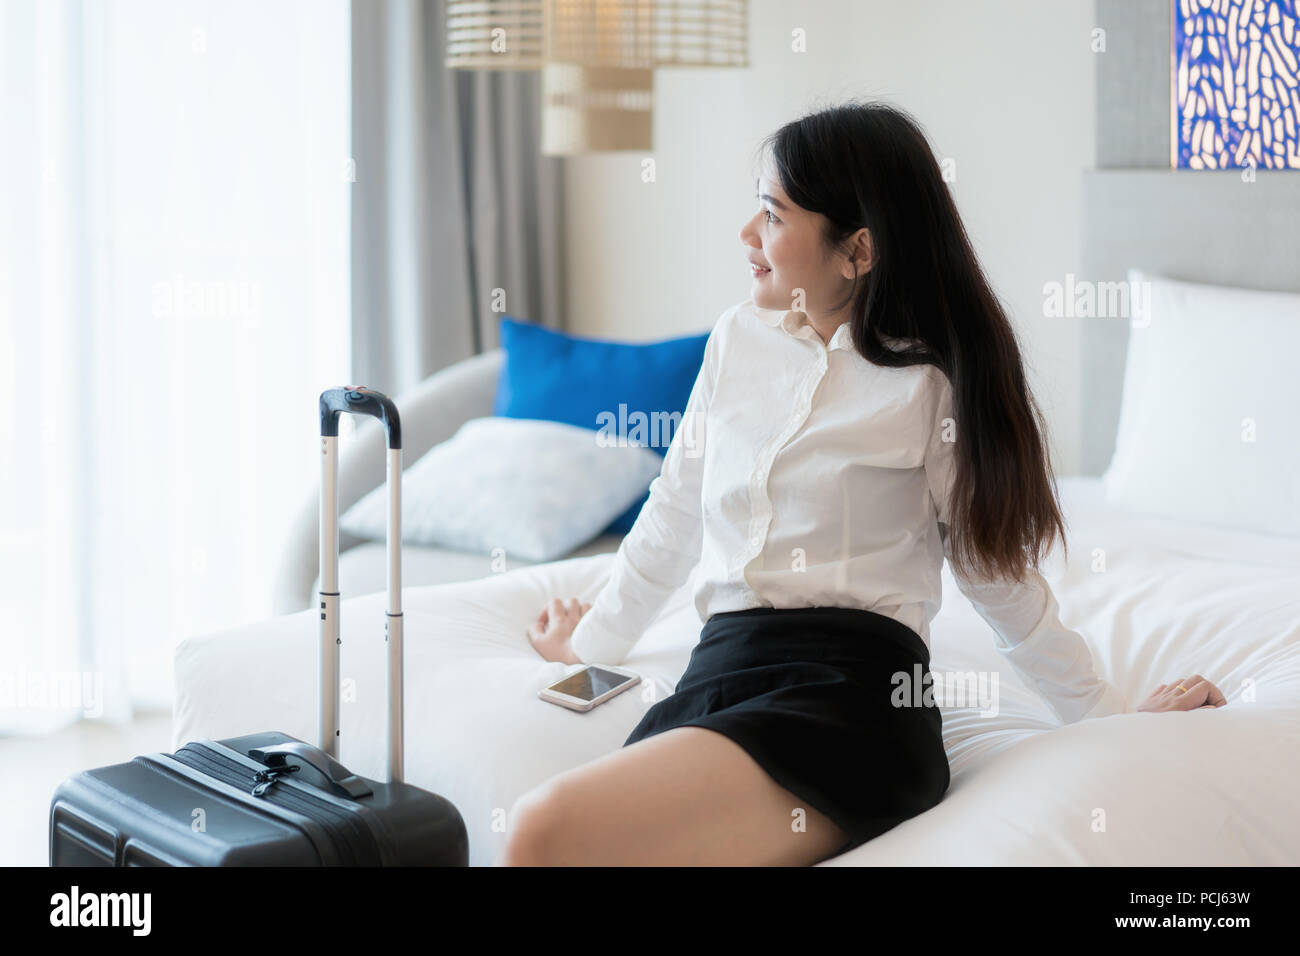 Smiling Asian business woman sitting on bed in hotel room. Business travel concept. Stock Photo